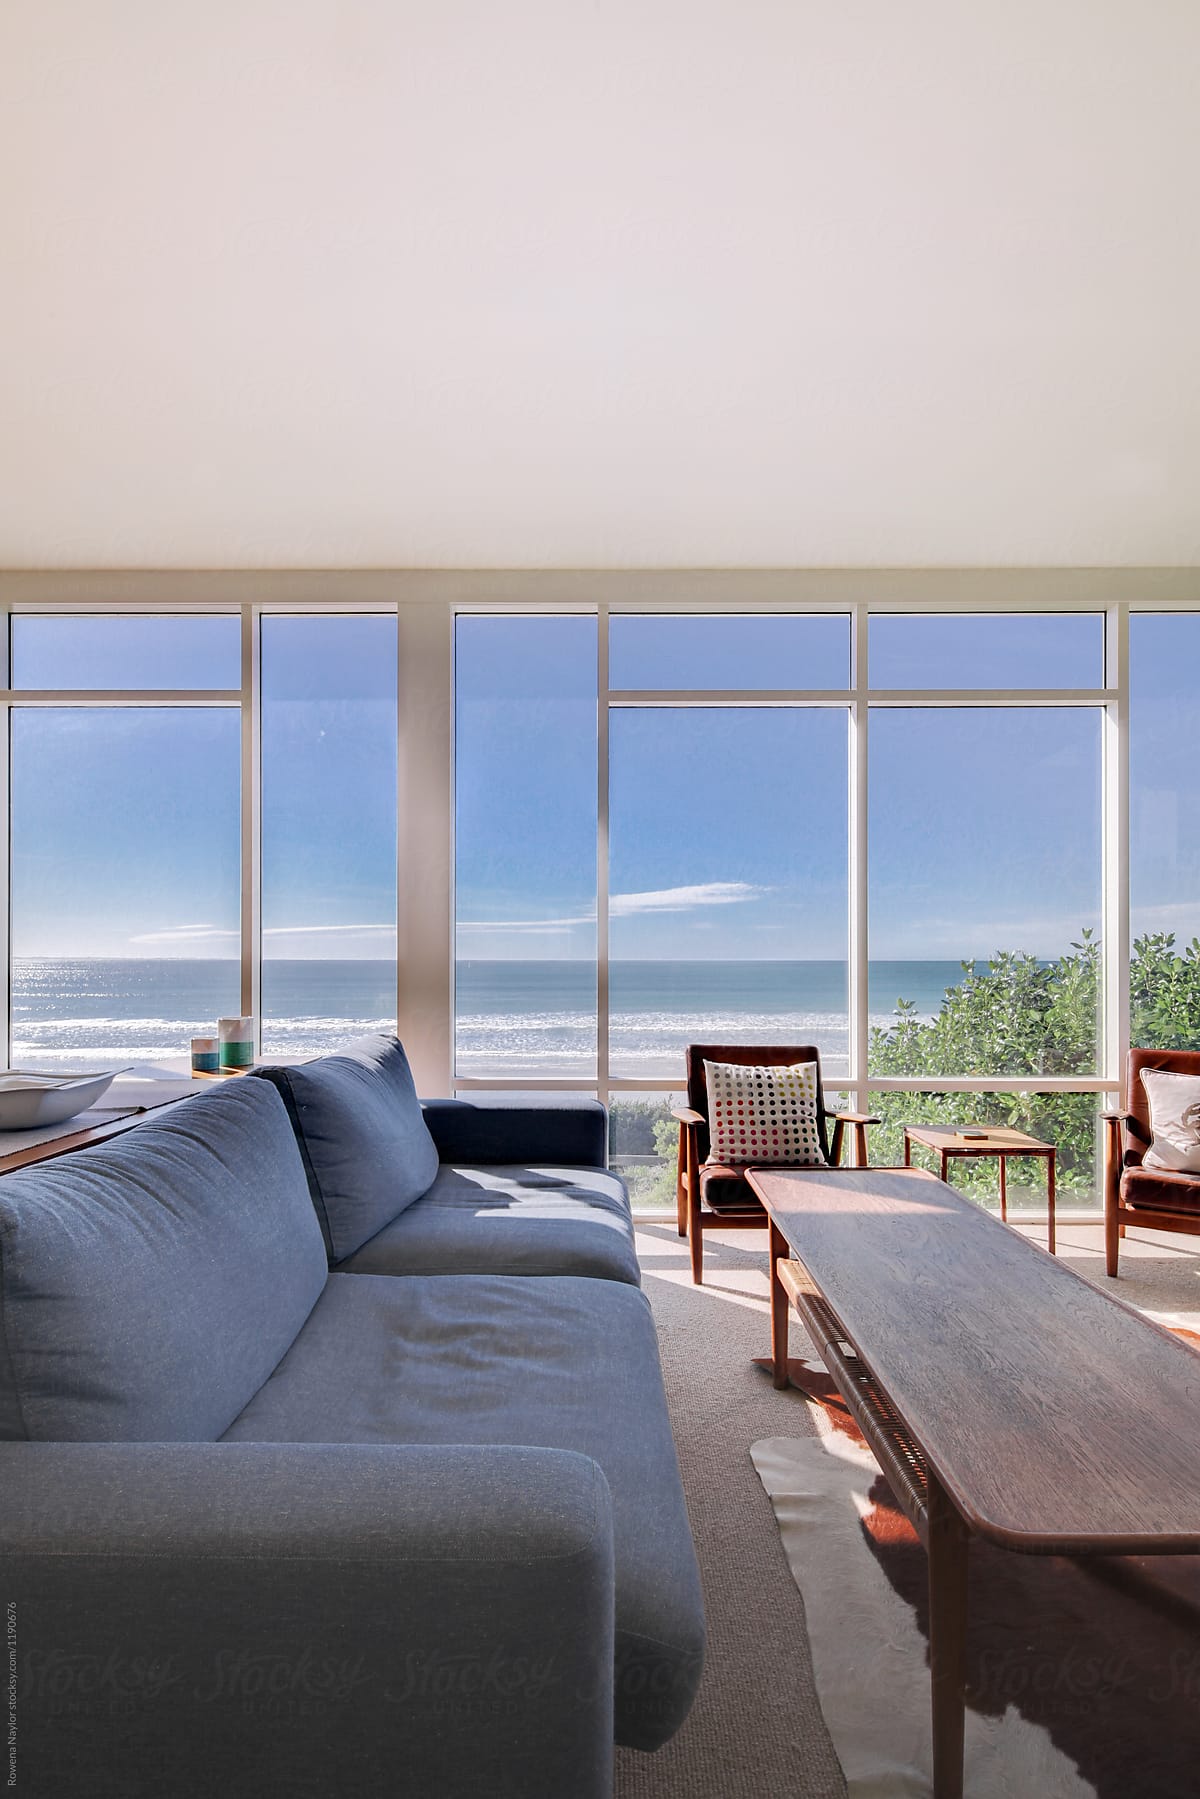 Lounge room of beach home with ocean views